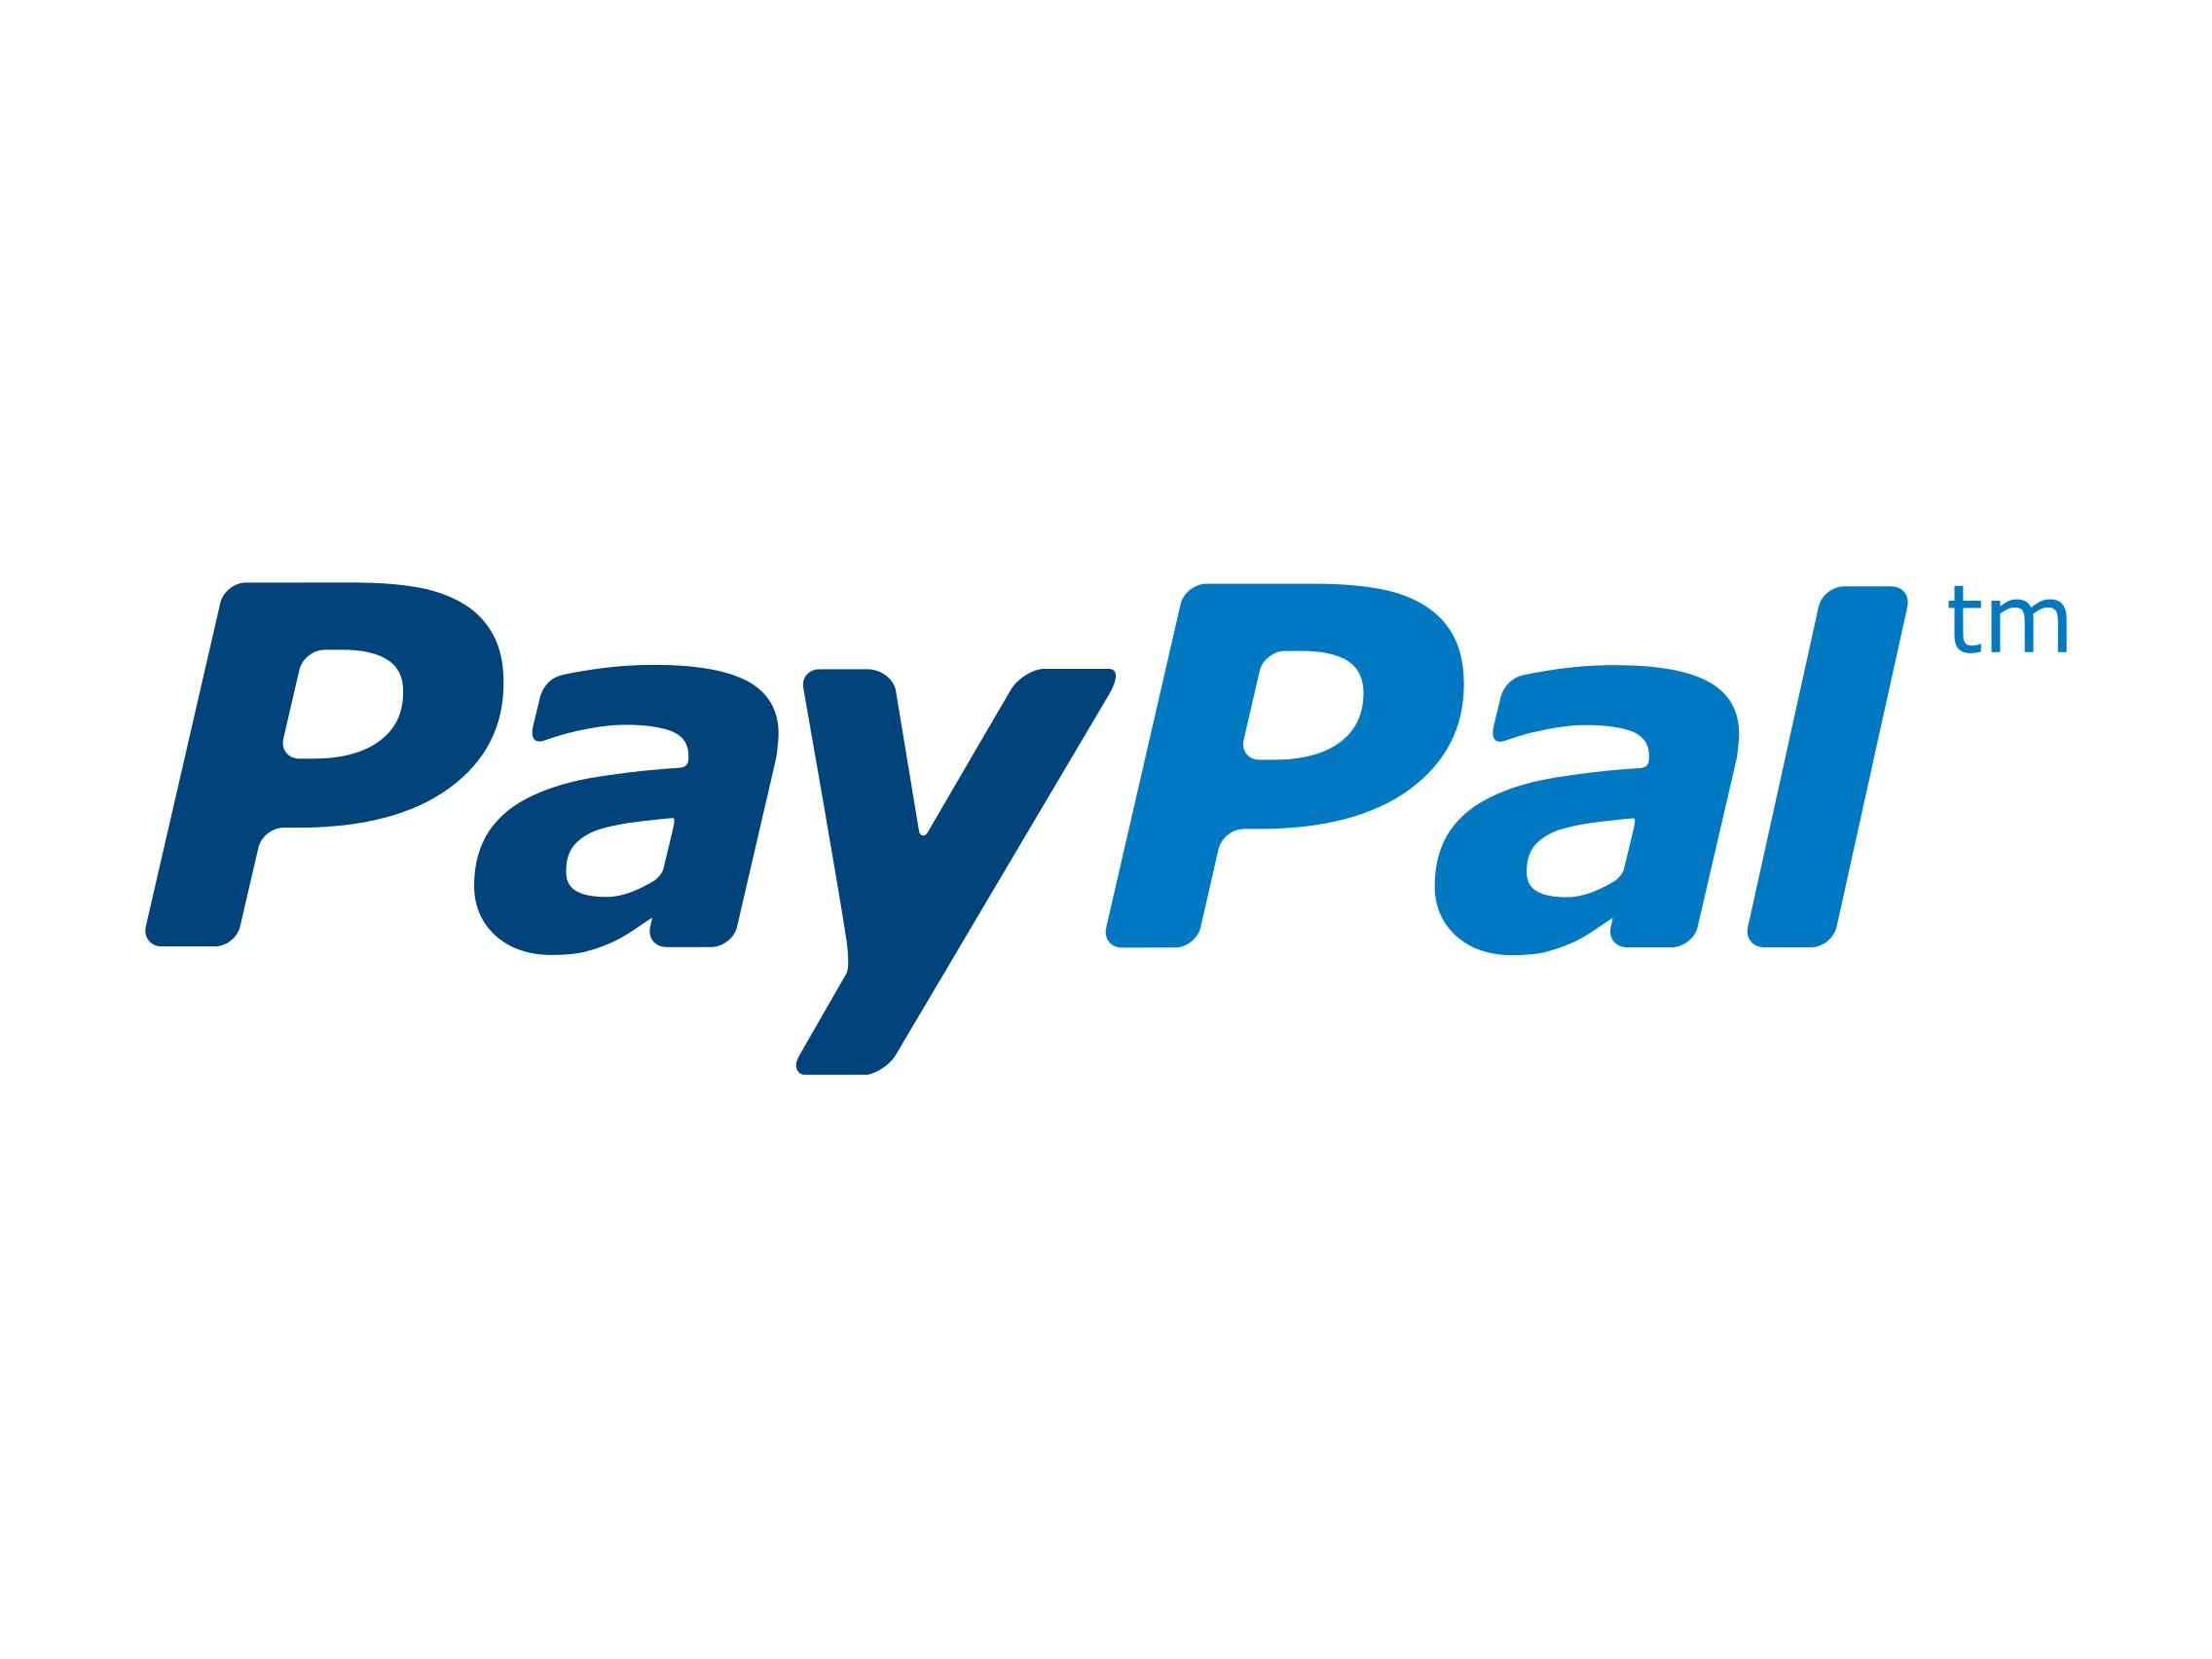 Paypal Wallpapers